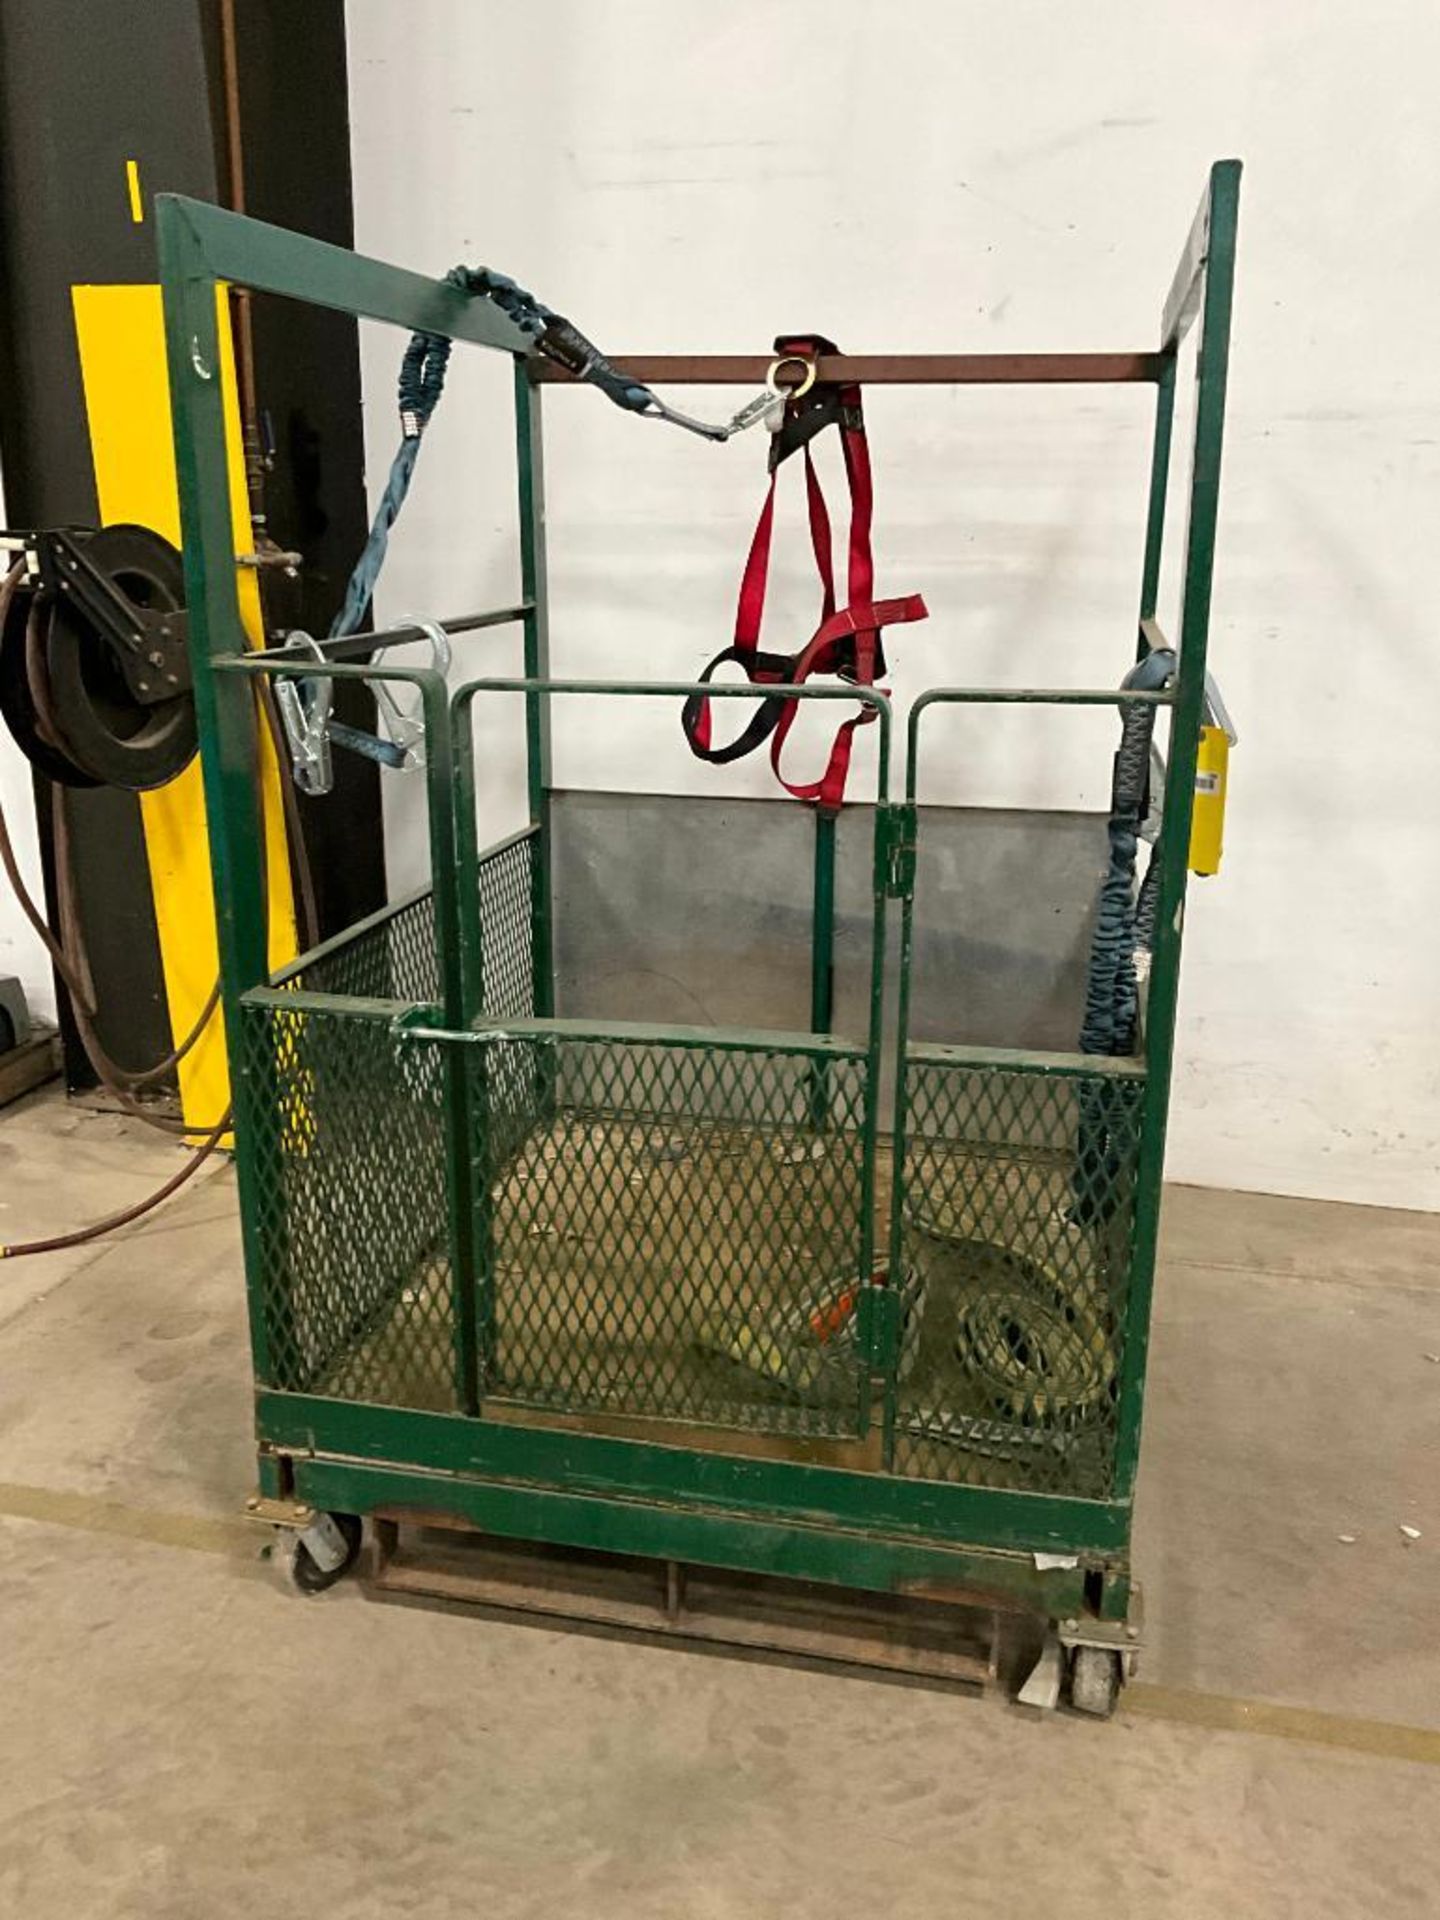 Crane Man Basket on Casters, 70" H x 44" W x 47" D, (1) Safety Harness, (2) Safety Straps - Image 2 of 12